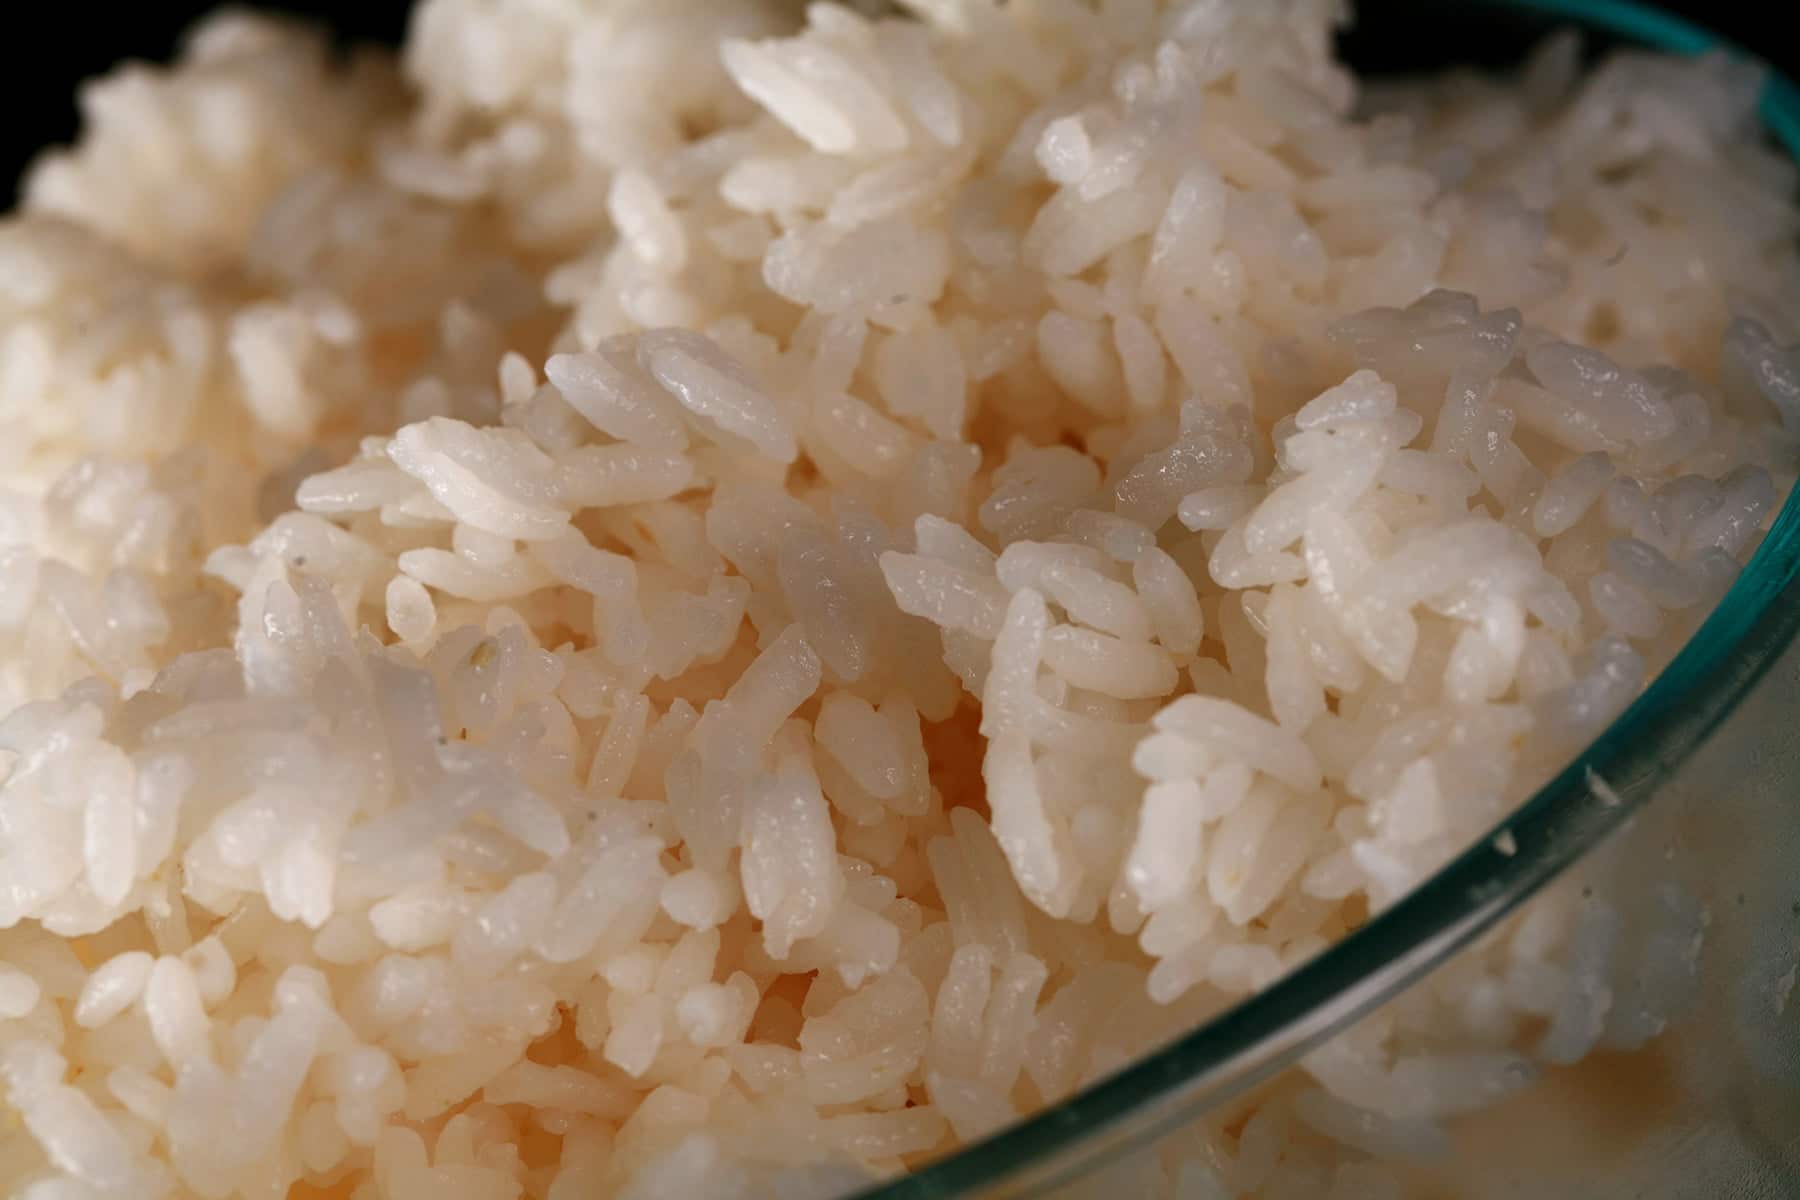 A glass bowl of sticky white rice against a black background